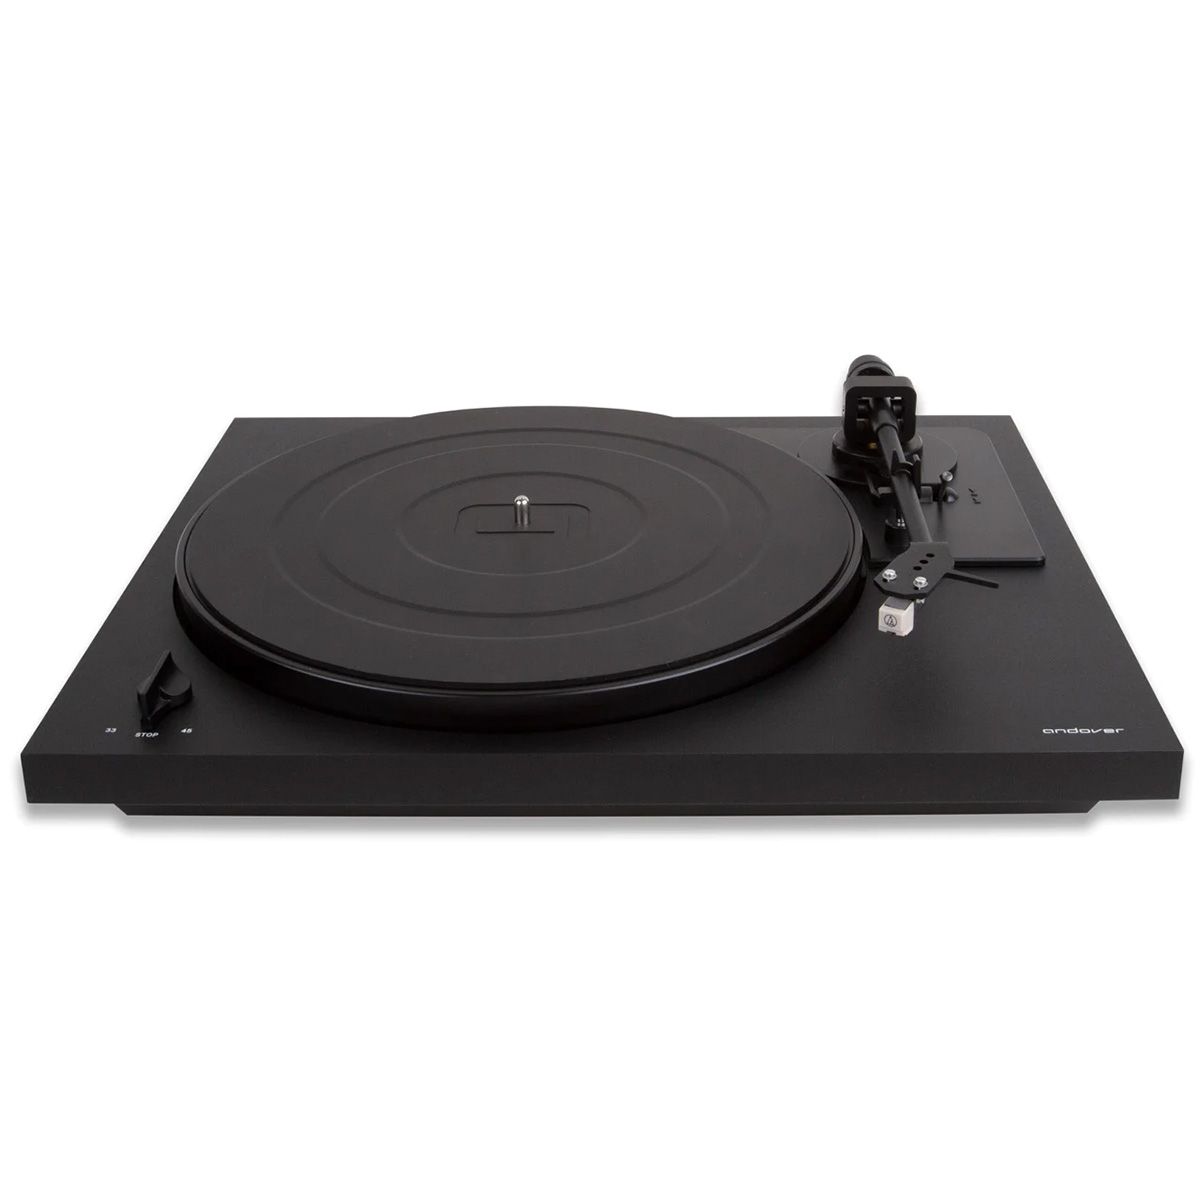 Andover Audio SpinDeck 2 Semi-Automatic Turntable - black with no dustcover, angled front view